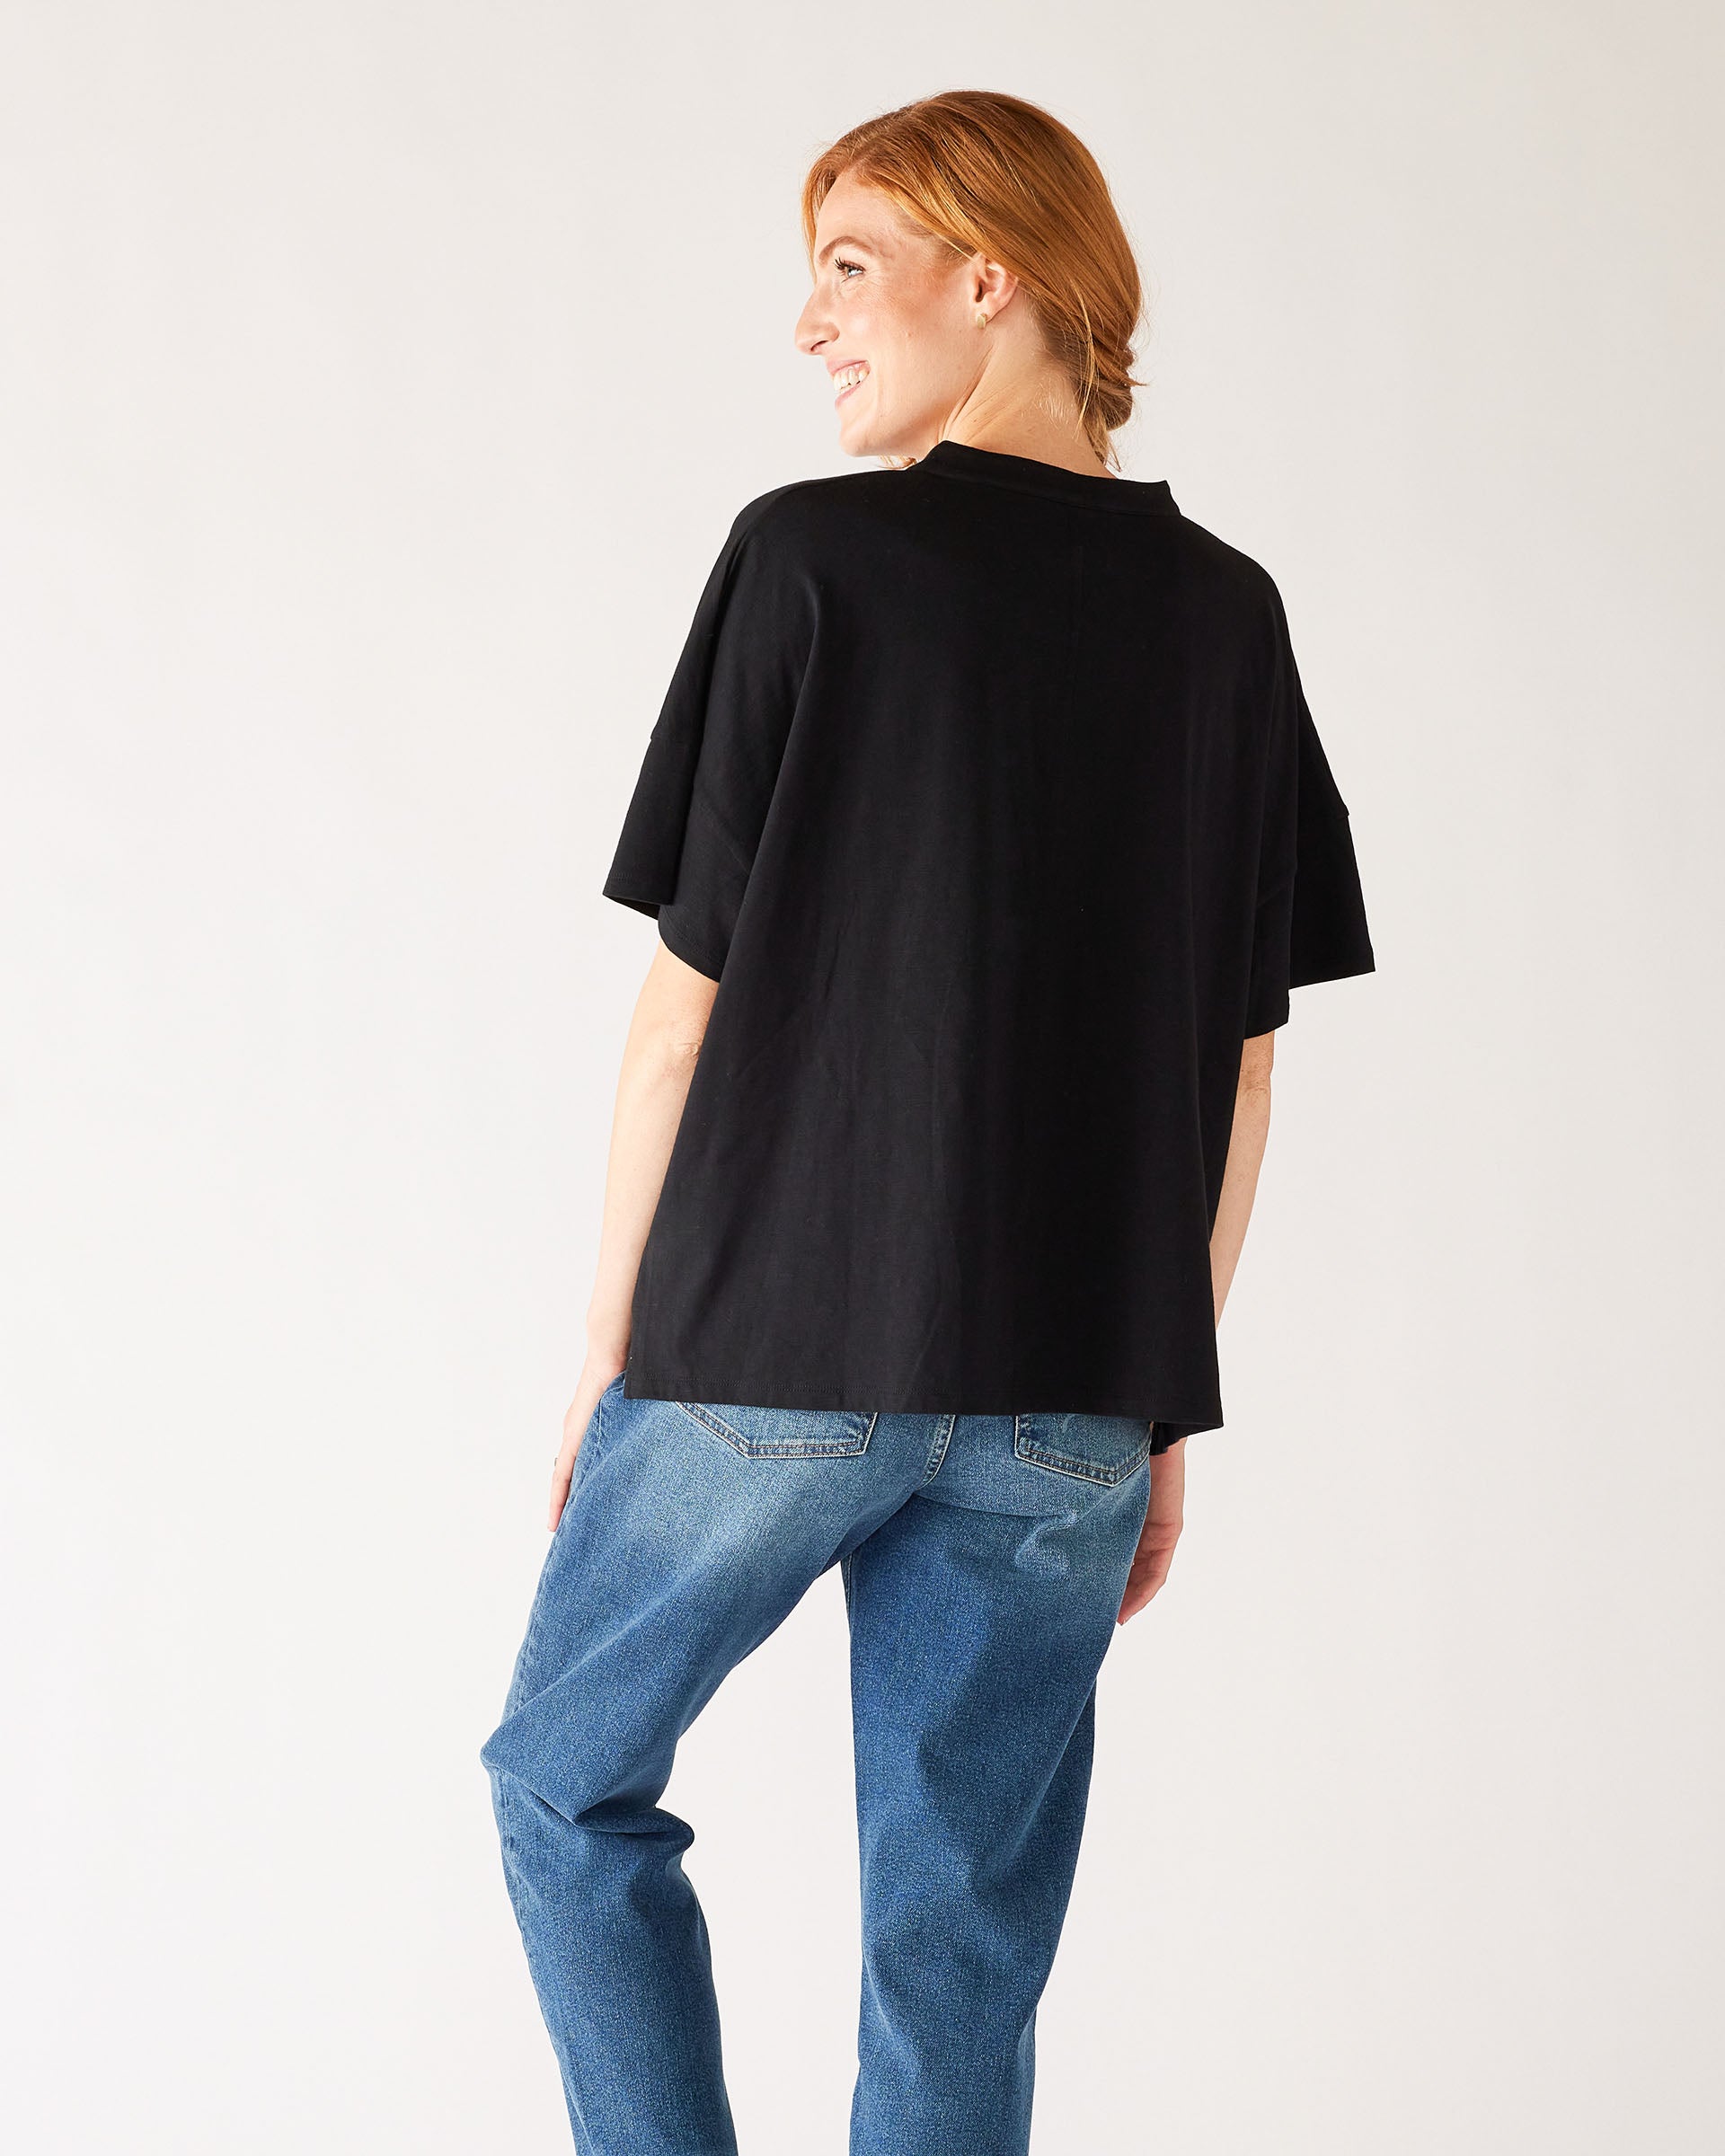 Women's One Size Black Short Sleeve Tee with Two Pockets on Chest Back View